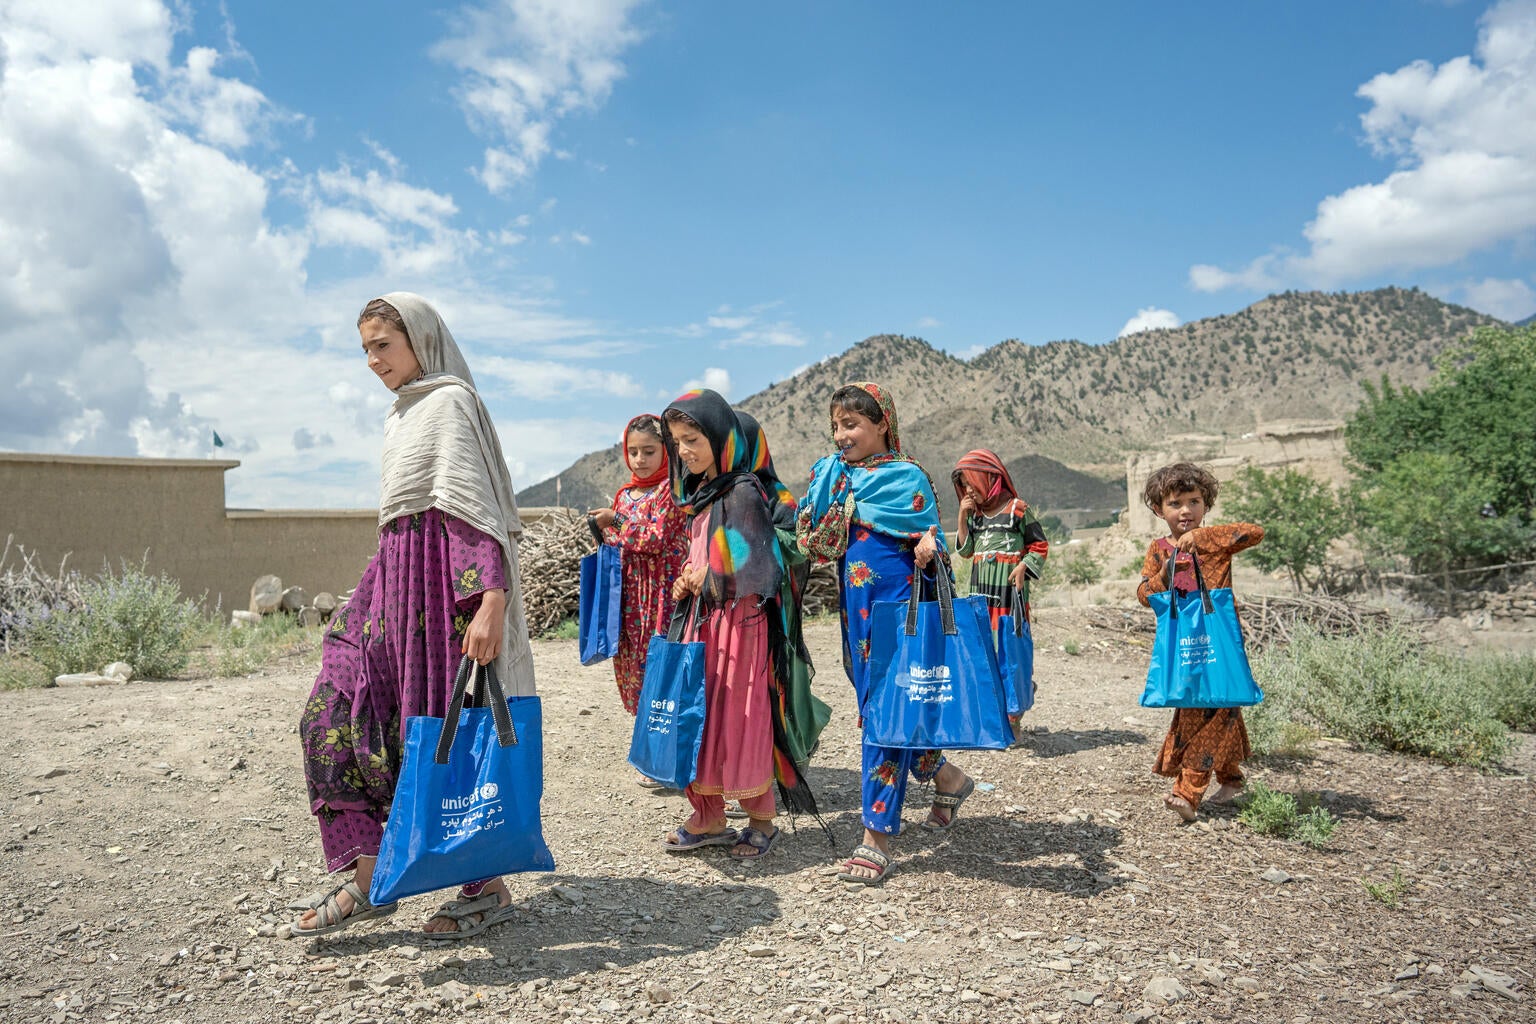 Afghanistan girls walking together along a dirt path